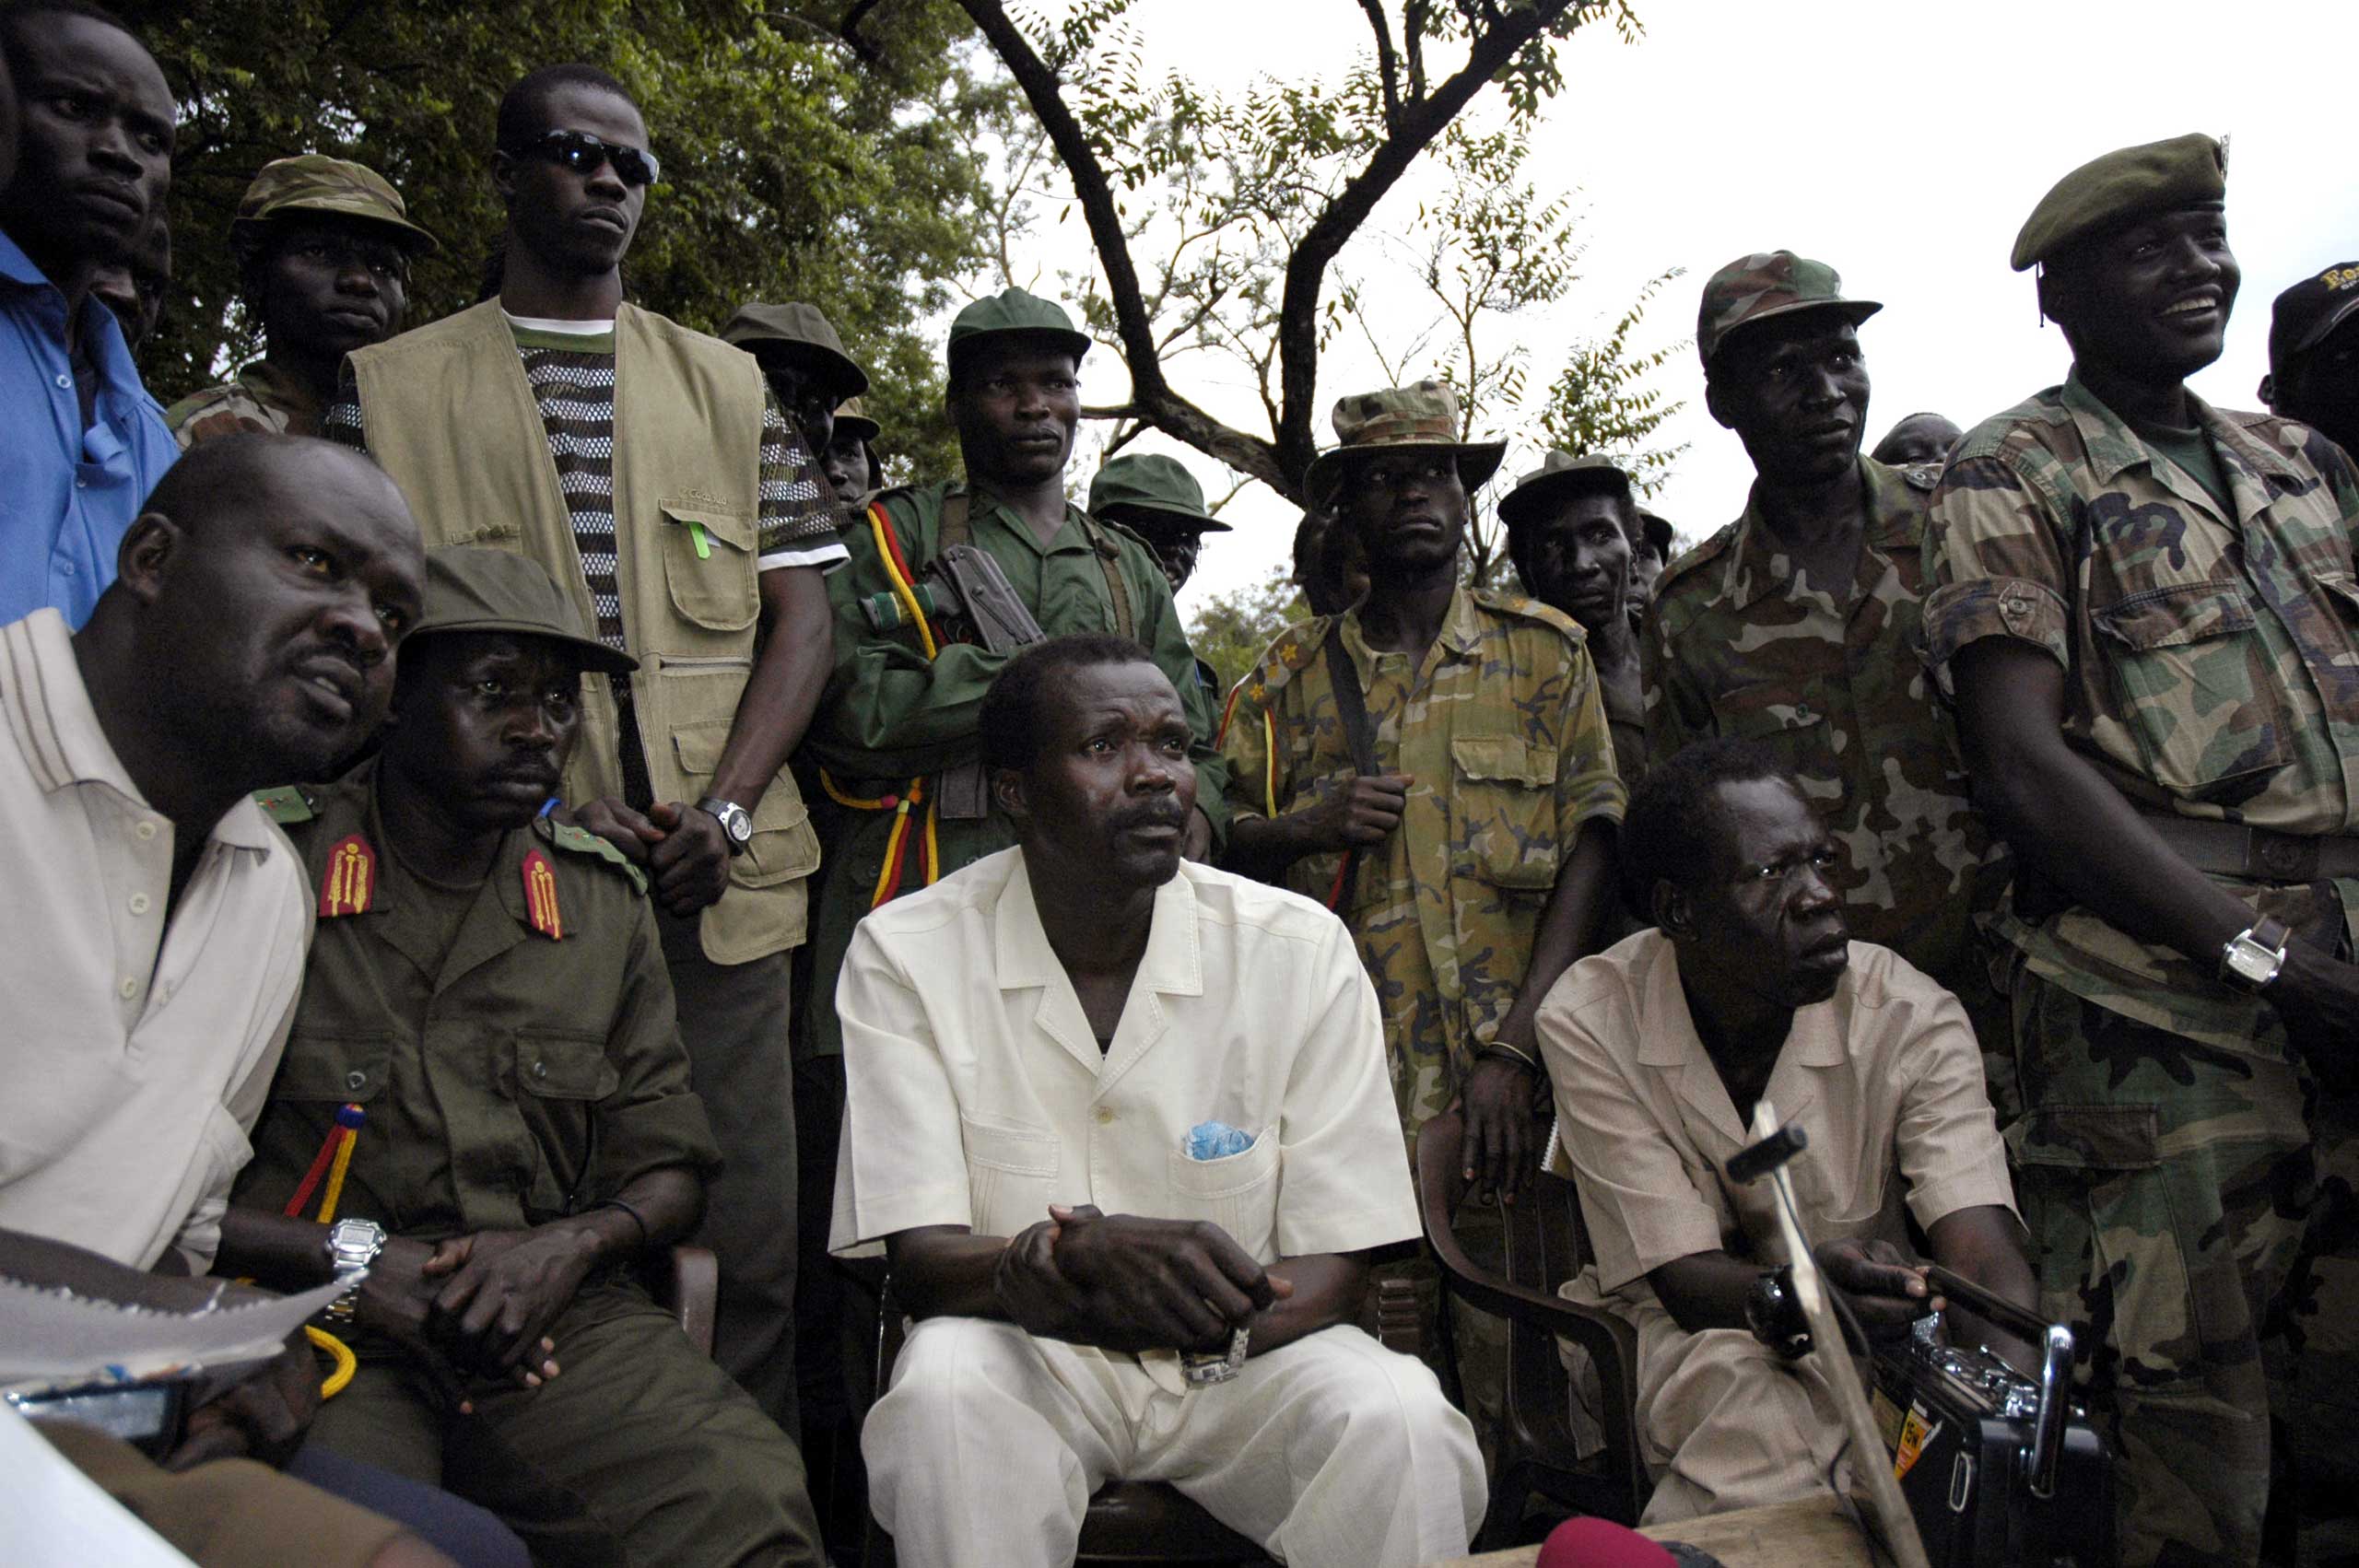 The leader of Uganda's Lord's Resistance Army rebels Joseph Kony (seated C), surrounded by his officers, addresses his first news conference in 20 years of rebellion in Nabanga, Sudan, on Aug. 1, 2006. (Adam Pletts—Reuters)